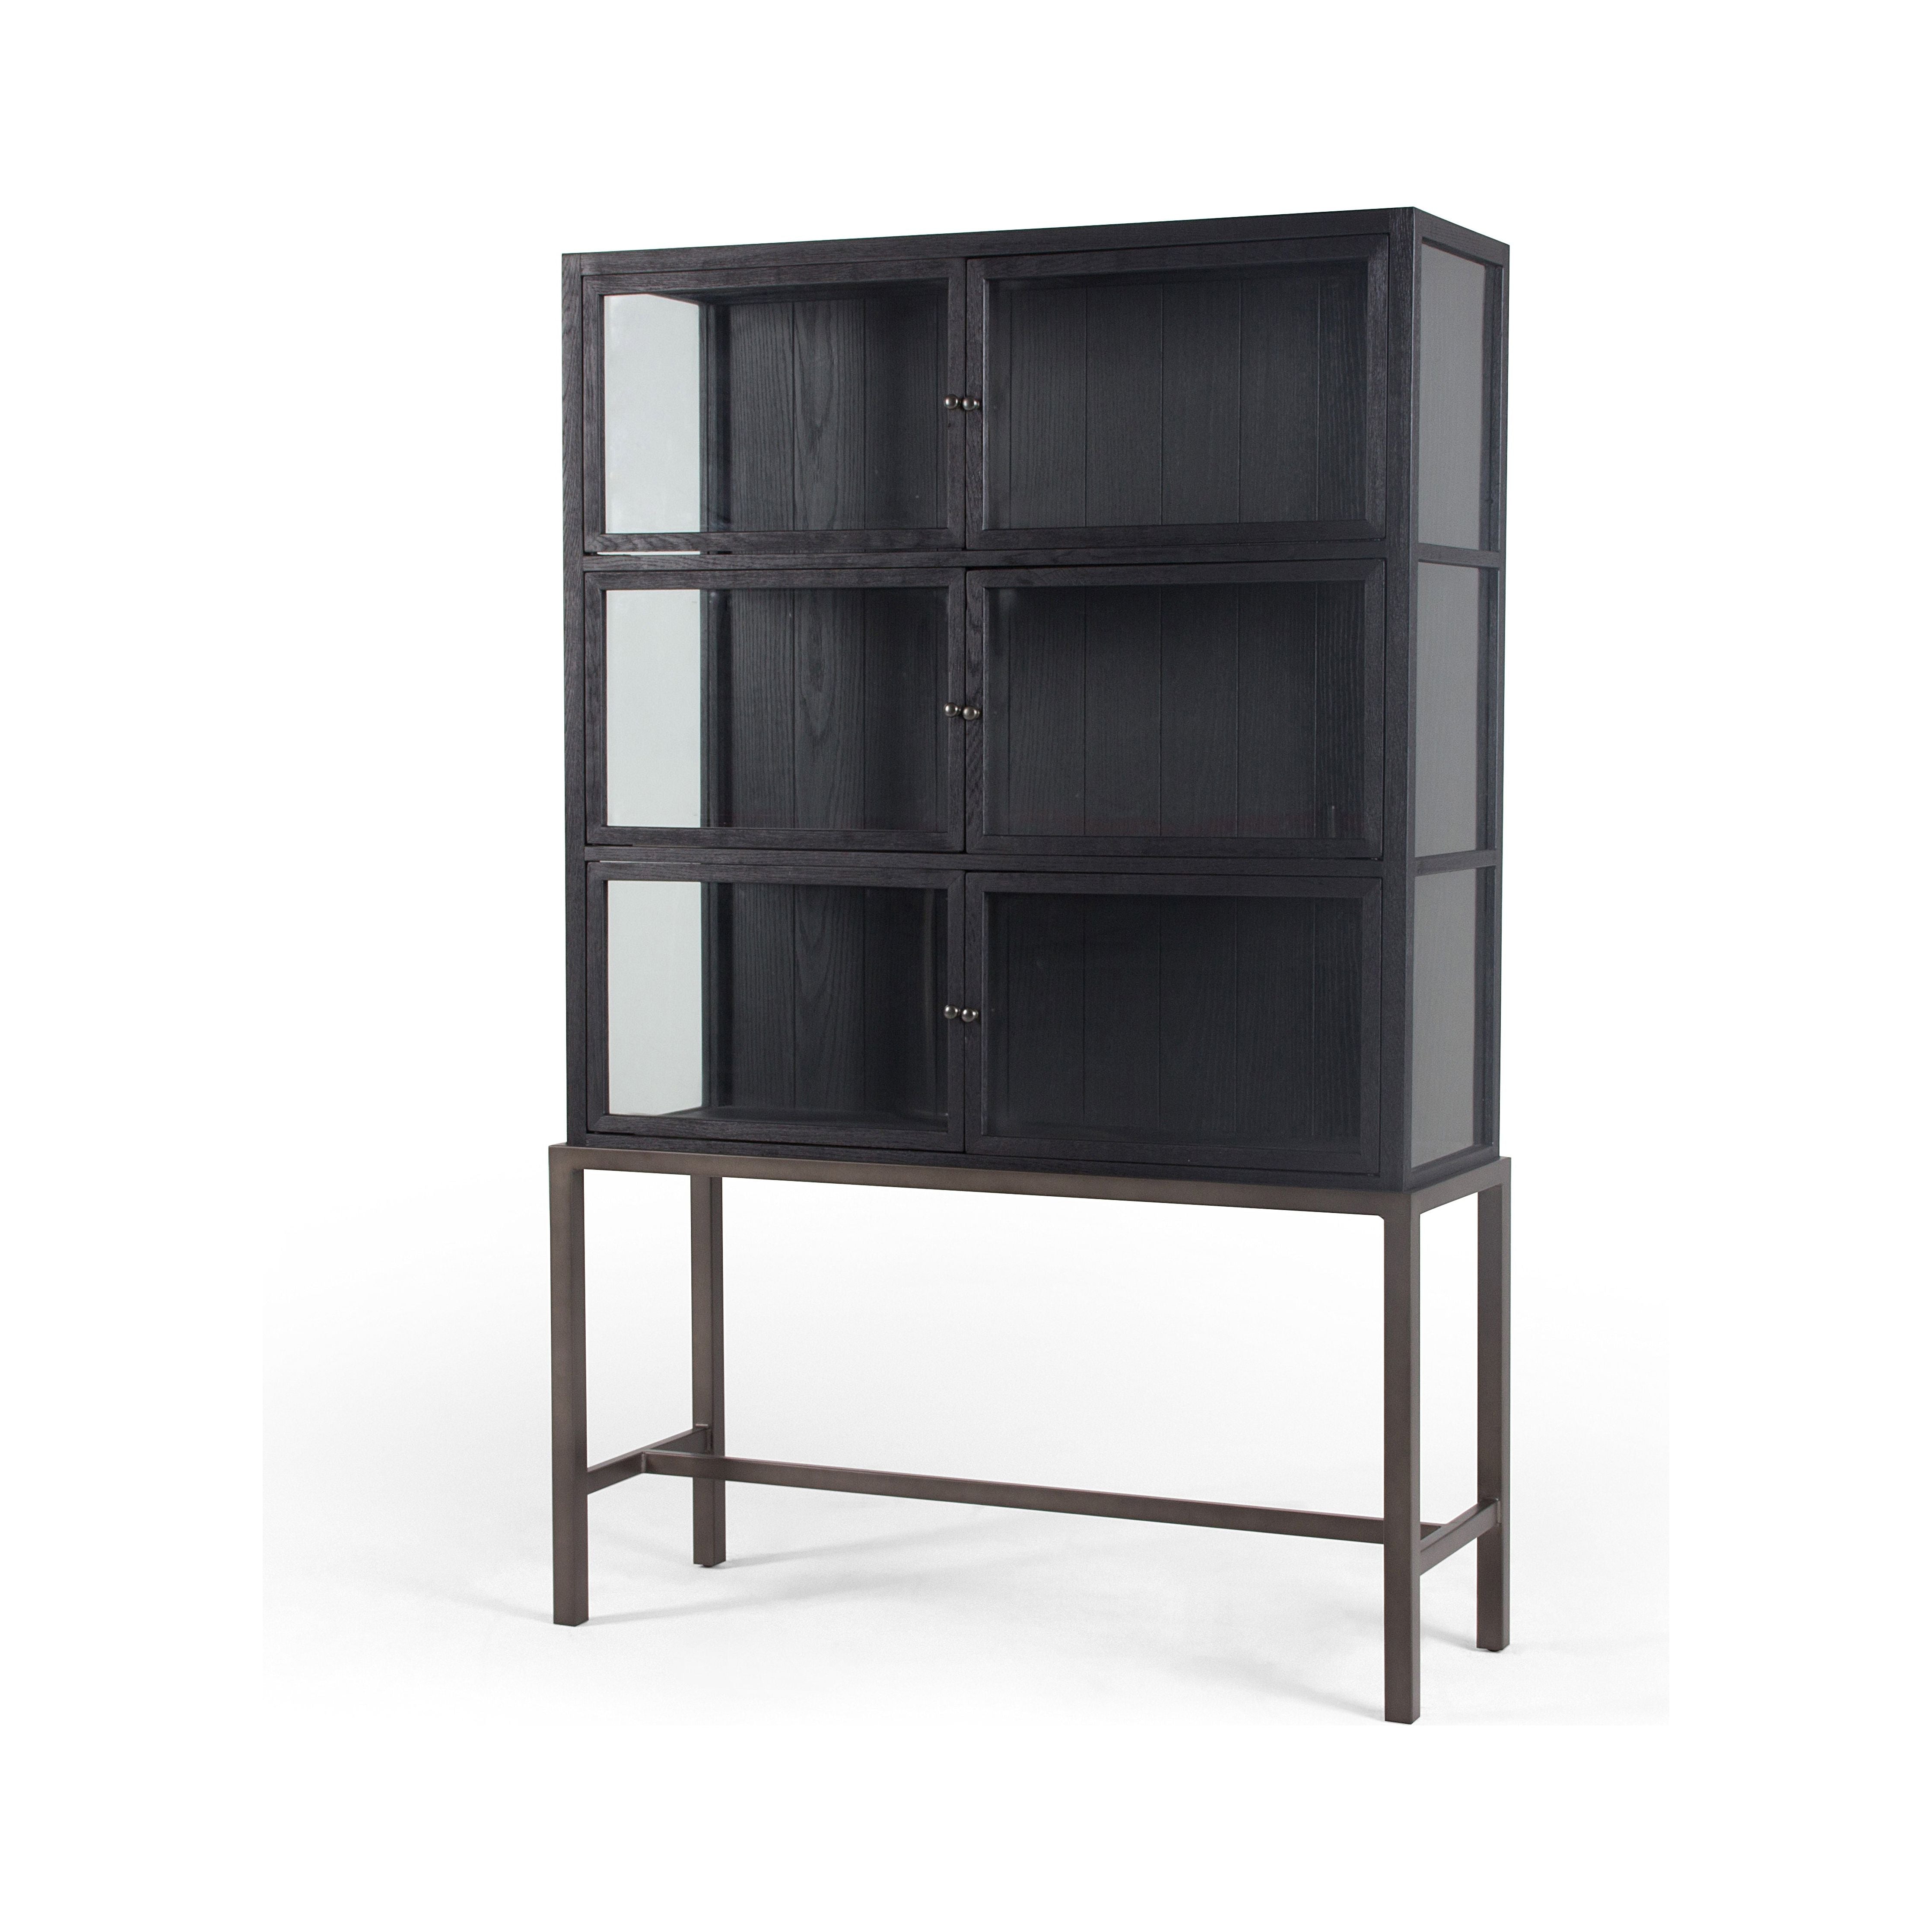 We love how the Spencer Drifted Black Curio Cabinet is perched on a simple, waxed black iron pedestal. The rustic black-finished oak forms an airy curio cabinet designed to showcase life’s artifacts.  Overall Dimensions: 45.75"w x 16"d x 69"h Materials: Plywood & Oak Veneer, Iron, Glass, Oak